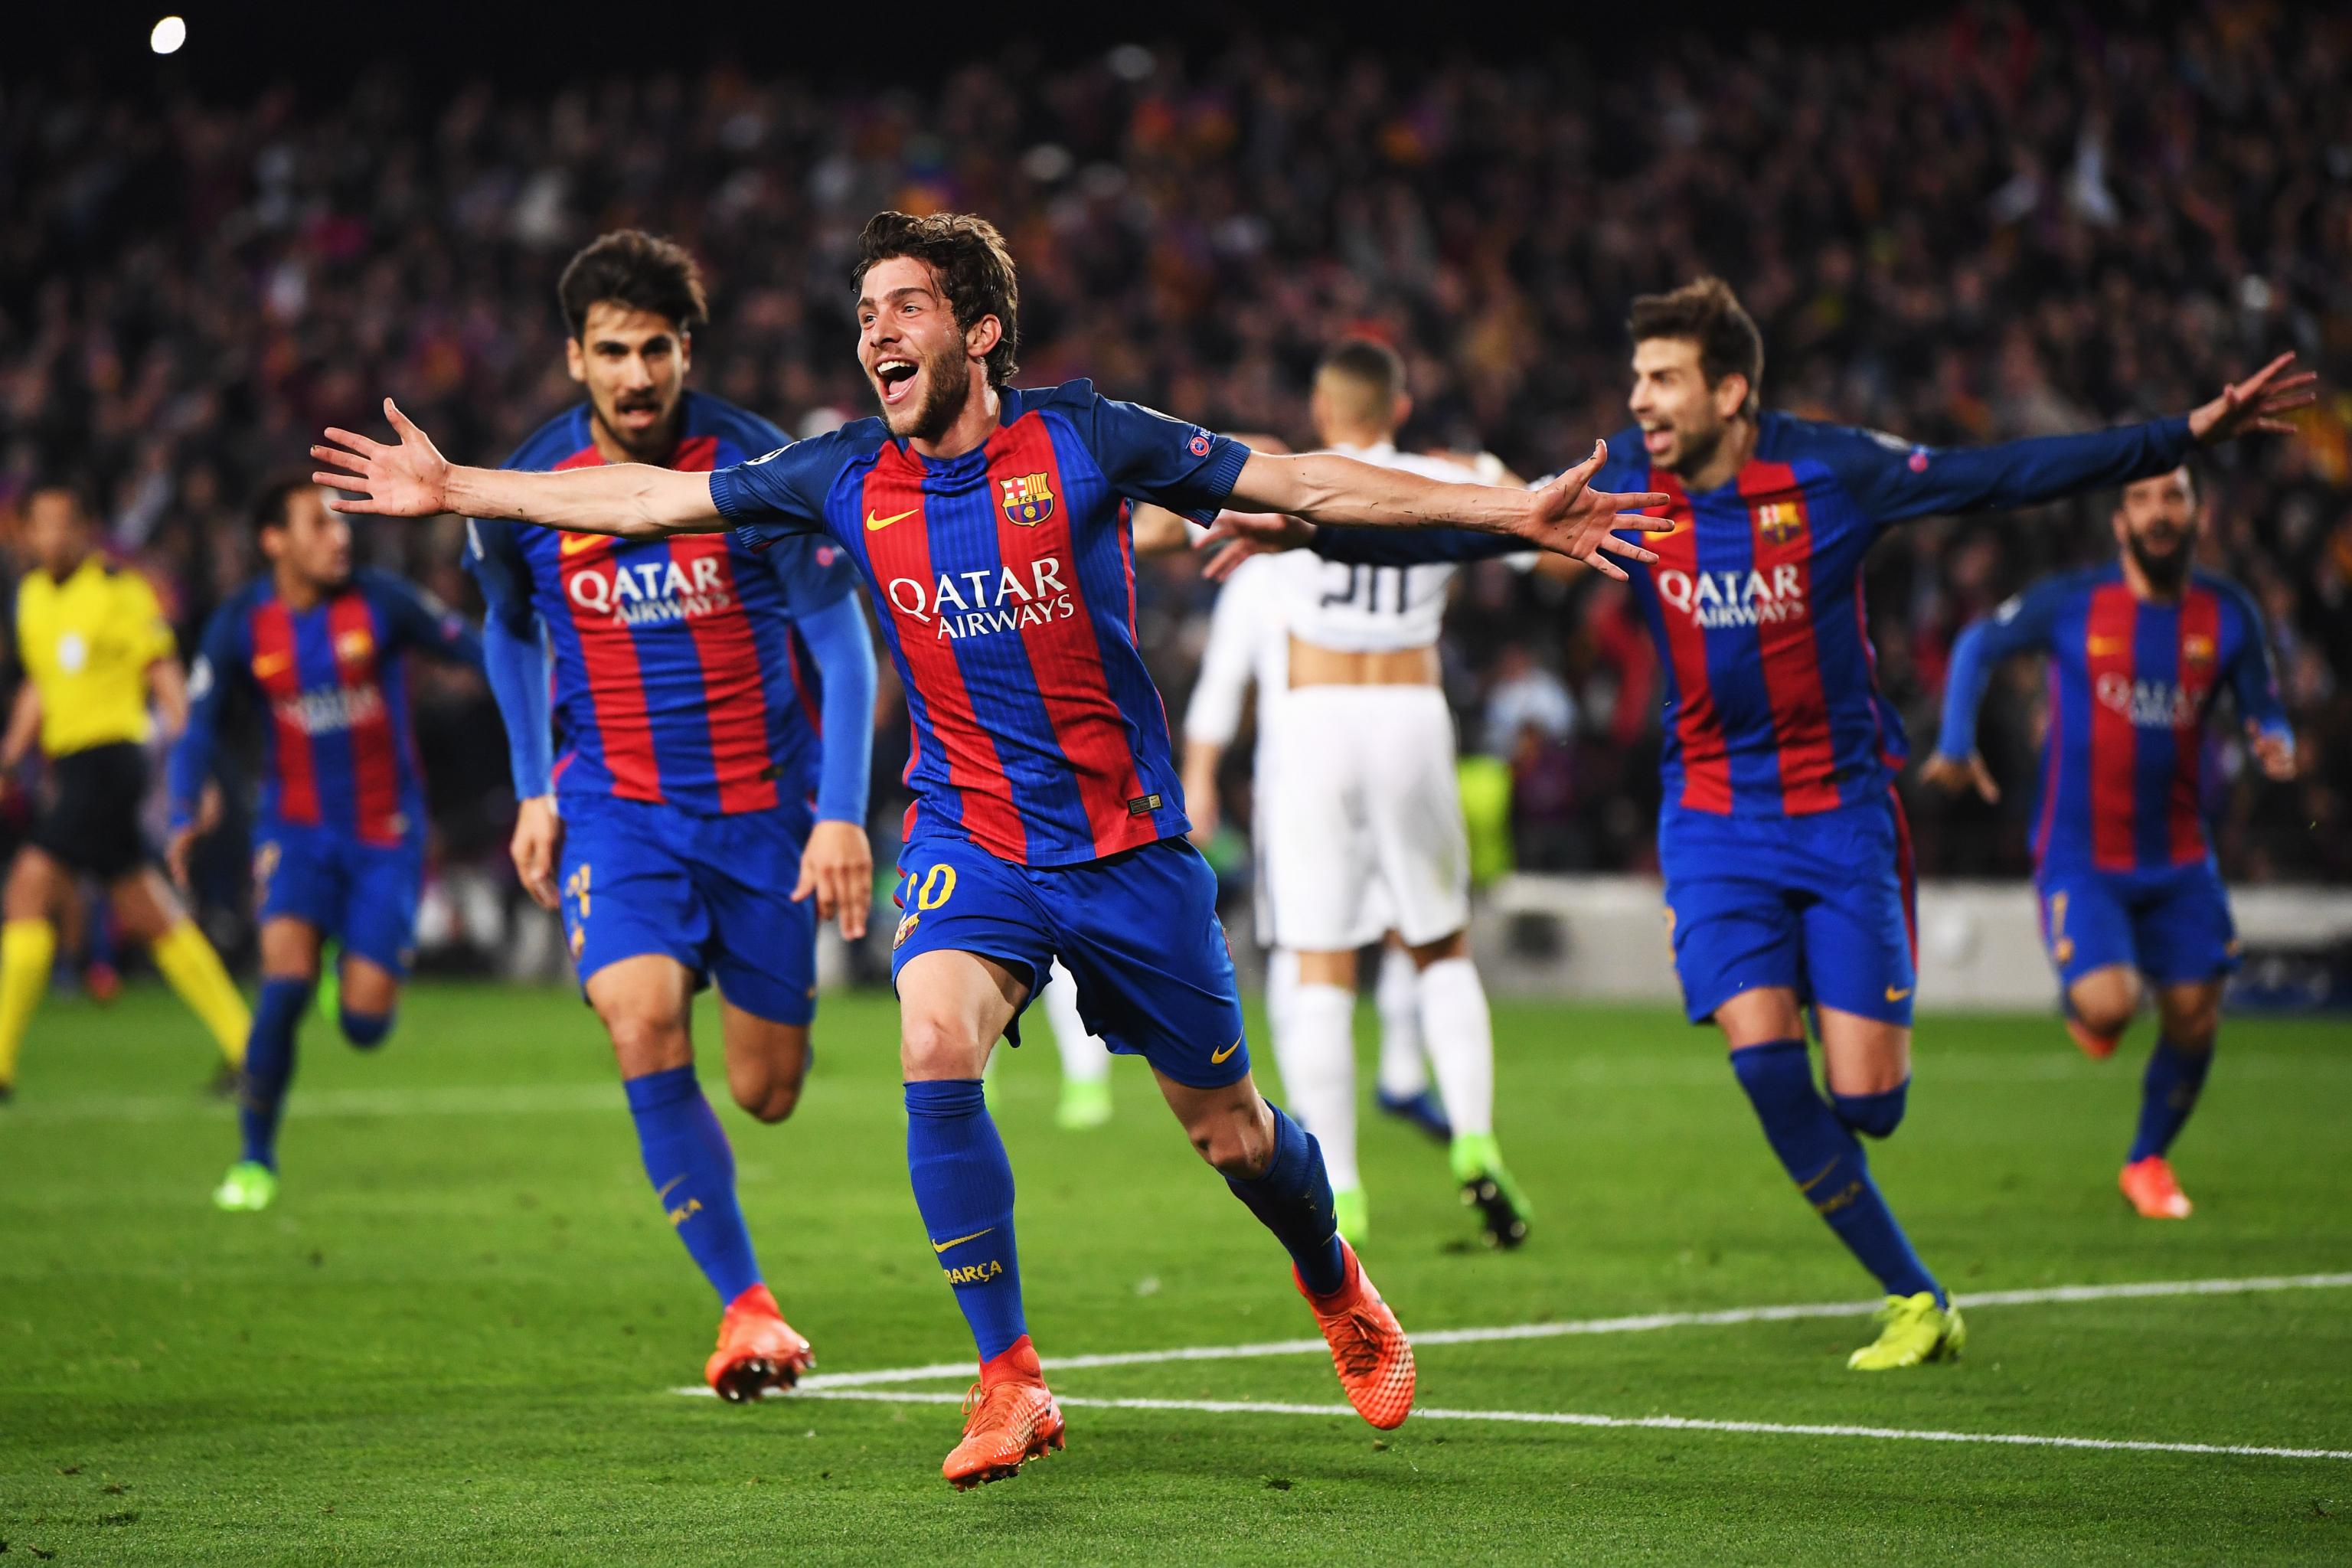 Barcelona Vs Psg Score And Reaction From 2017 Champions League Round Of 16 Bleacher Report Latest News Videos And Highlights